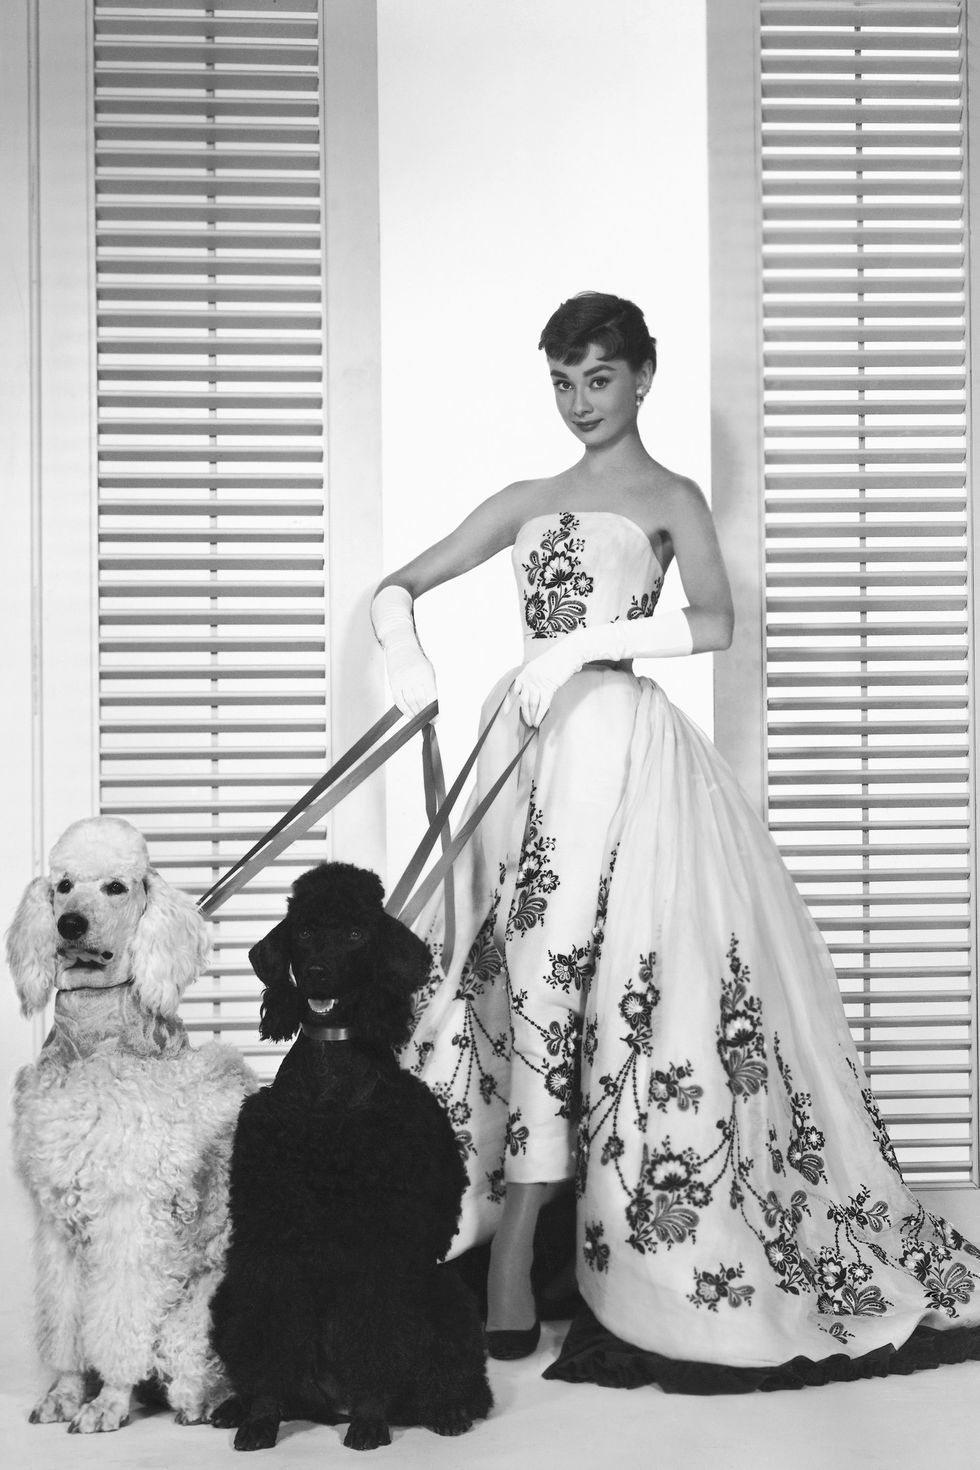 The History Behind Audrey Hepburn's White Givenchy Dress From Sabrina